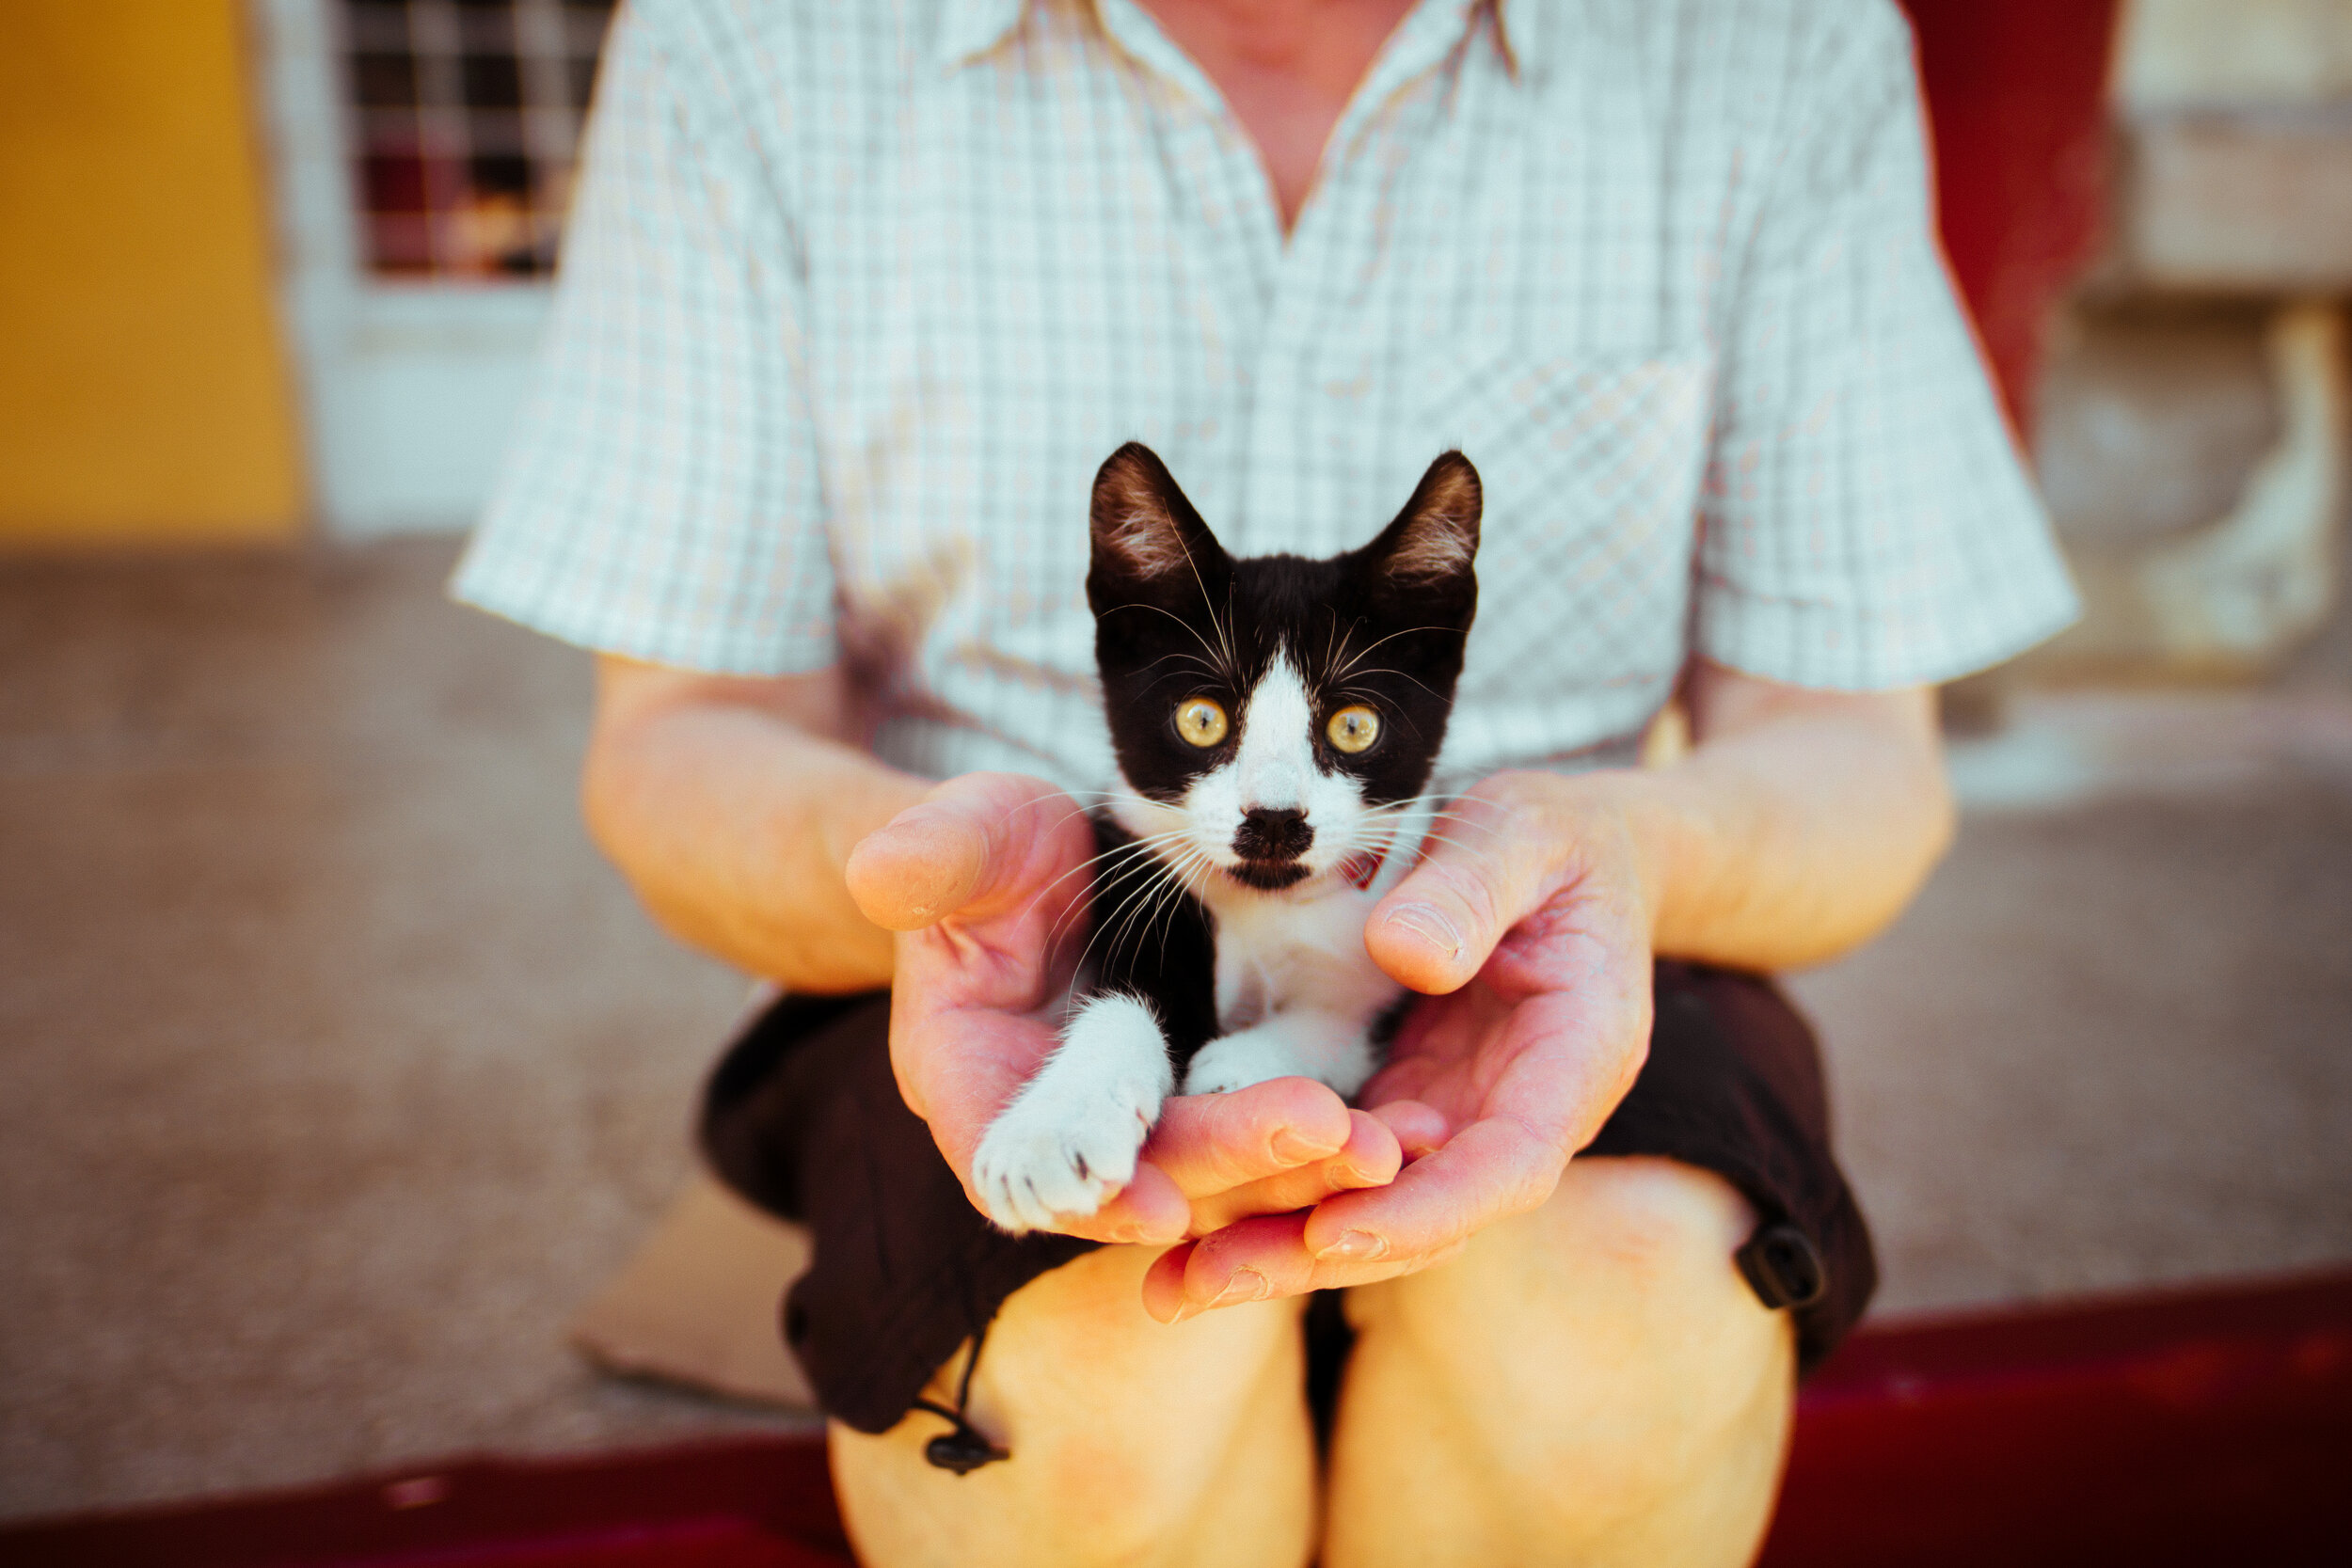 Our Story — Cat Kids Rescue Cat & Kitten Adoptions in St. Petersburg, FL